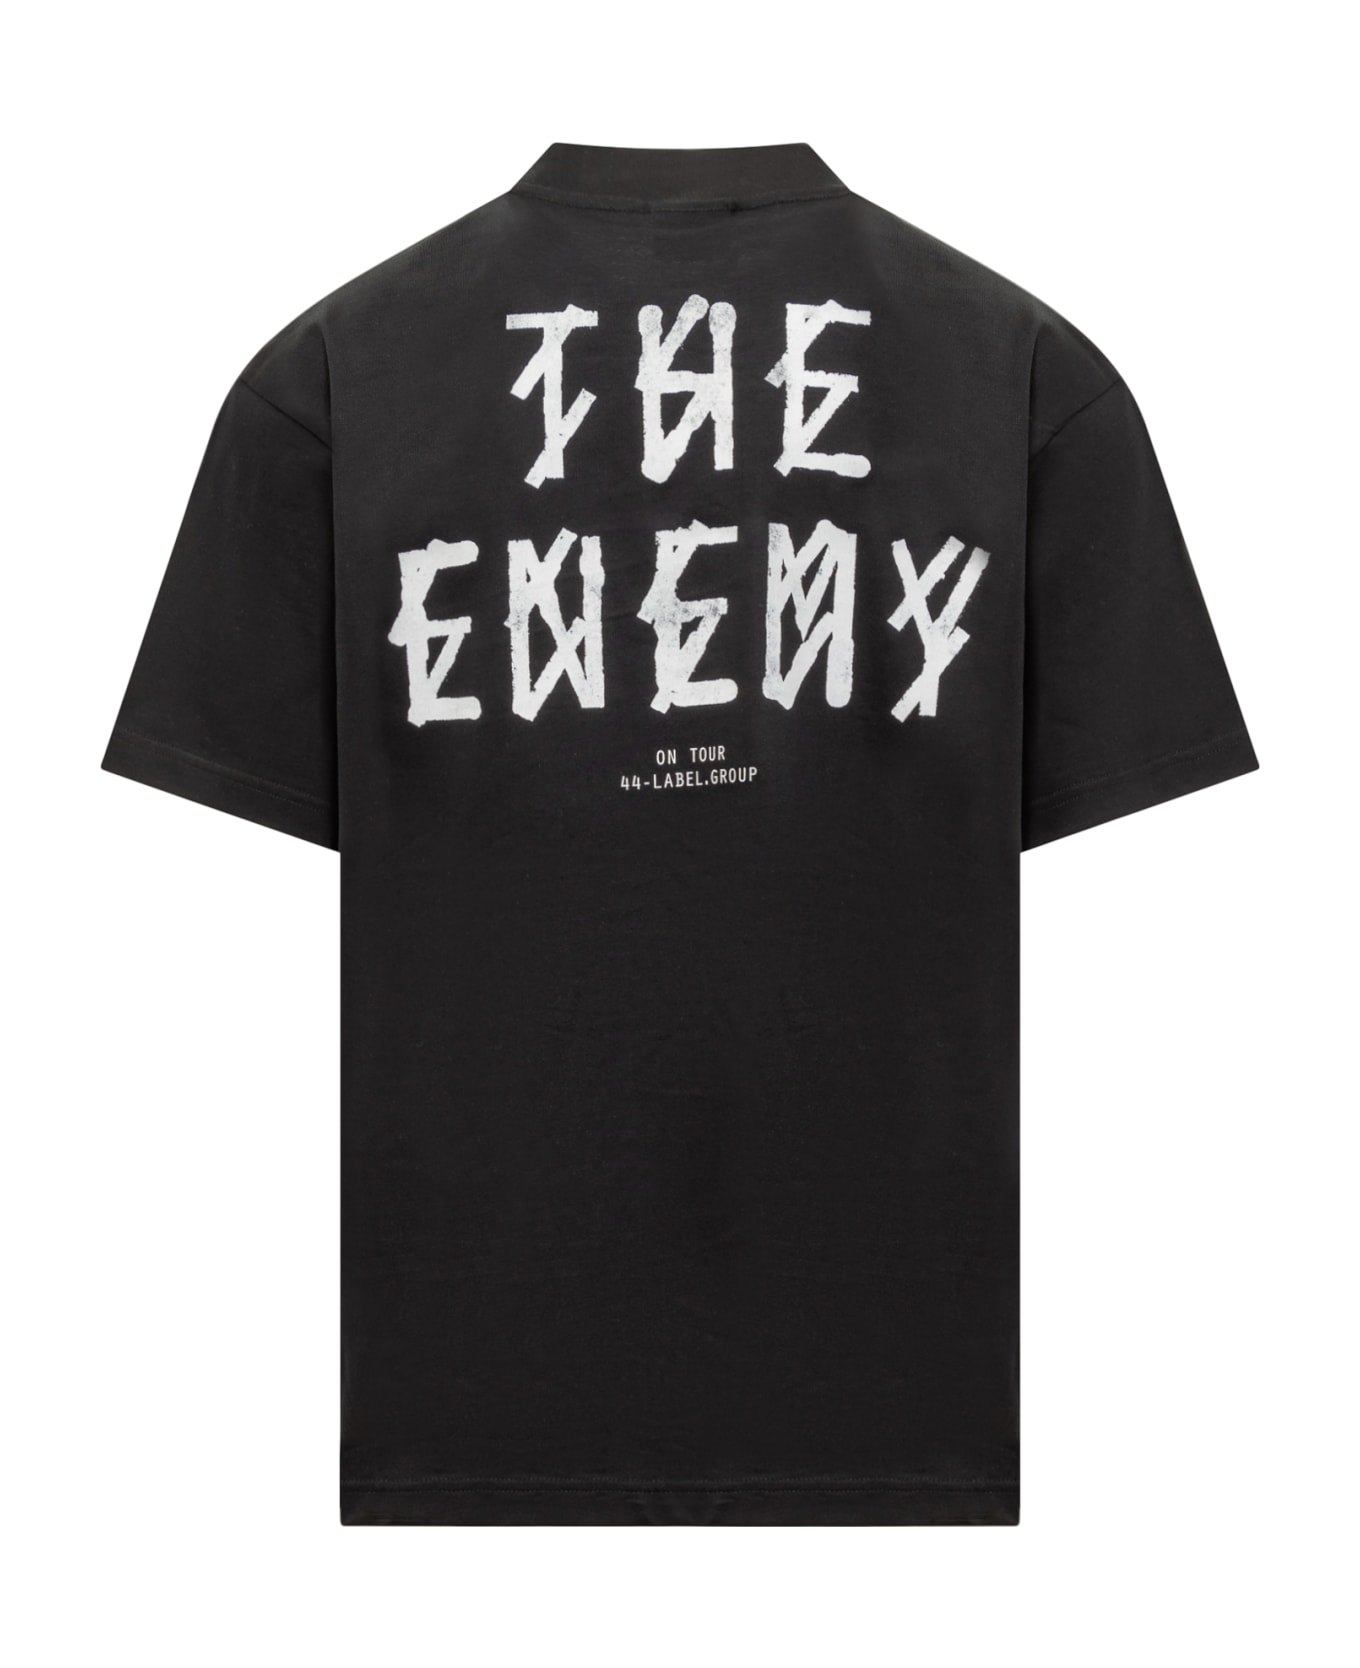 44 Label Group The Enemy T-shirt - BLACK